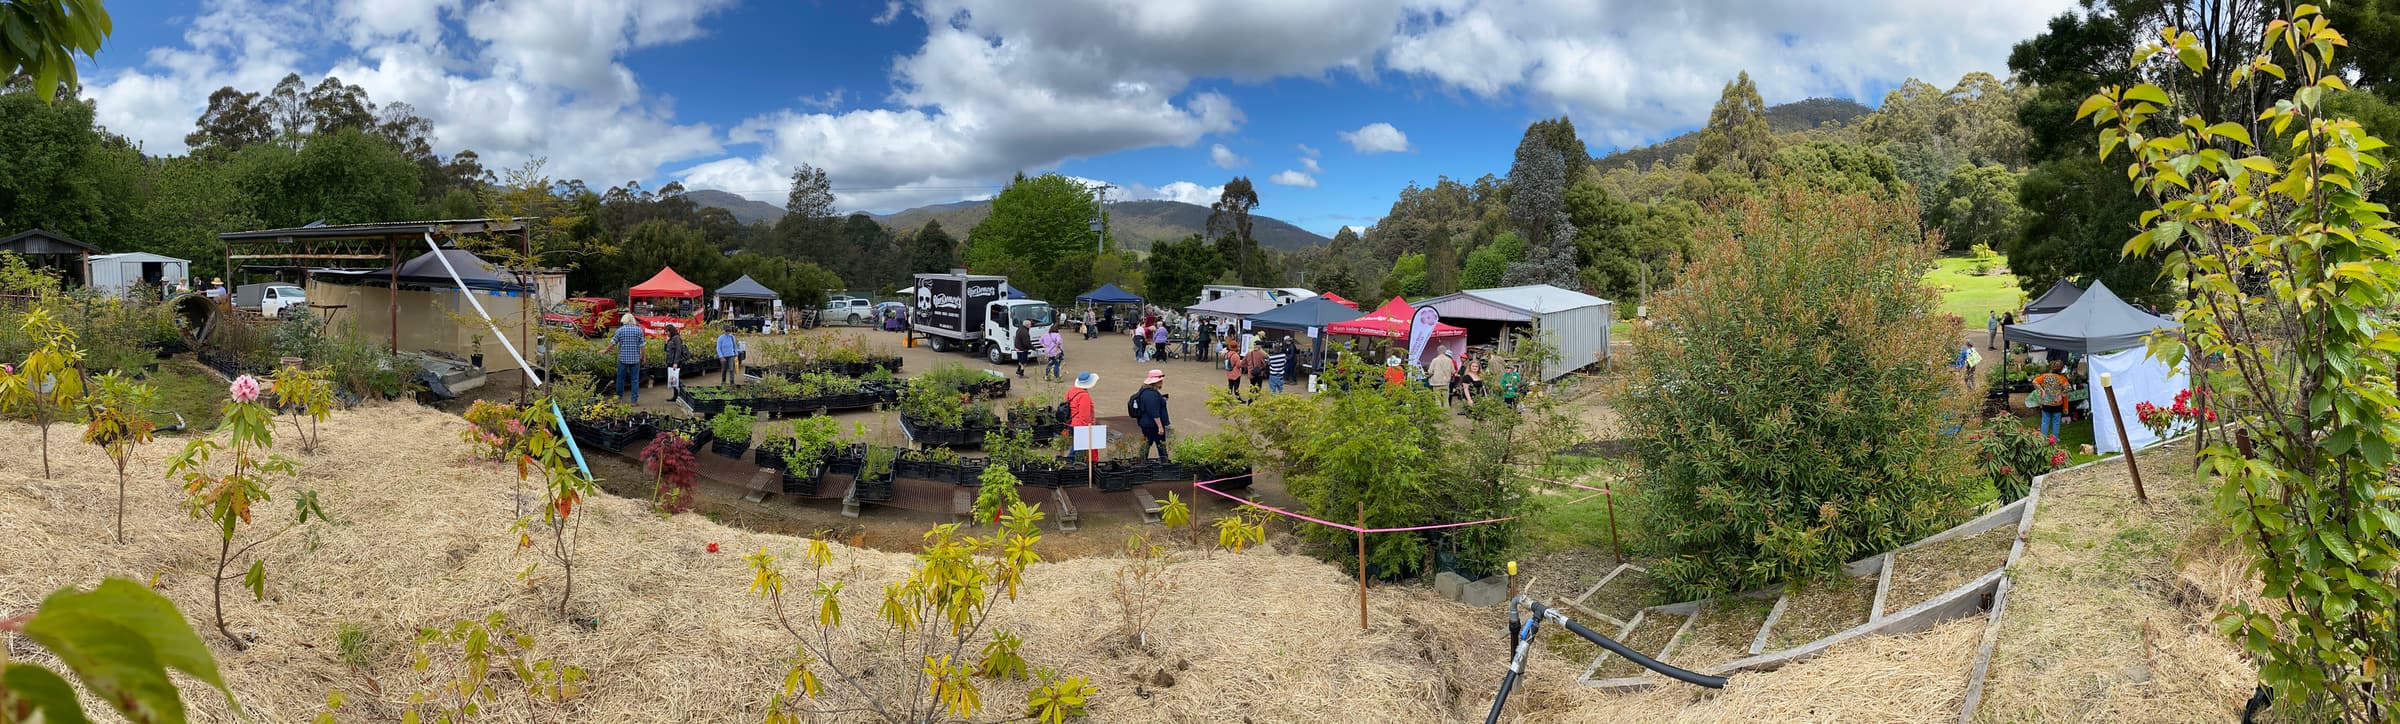 panoramic view of entrance to spring fair